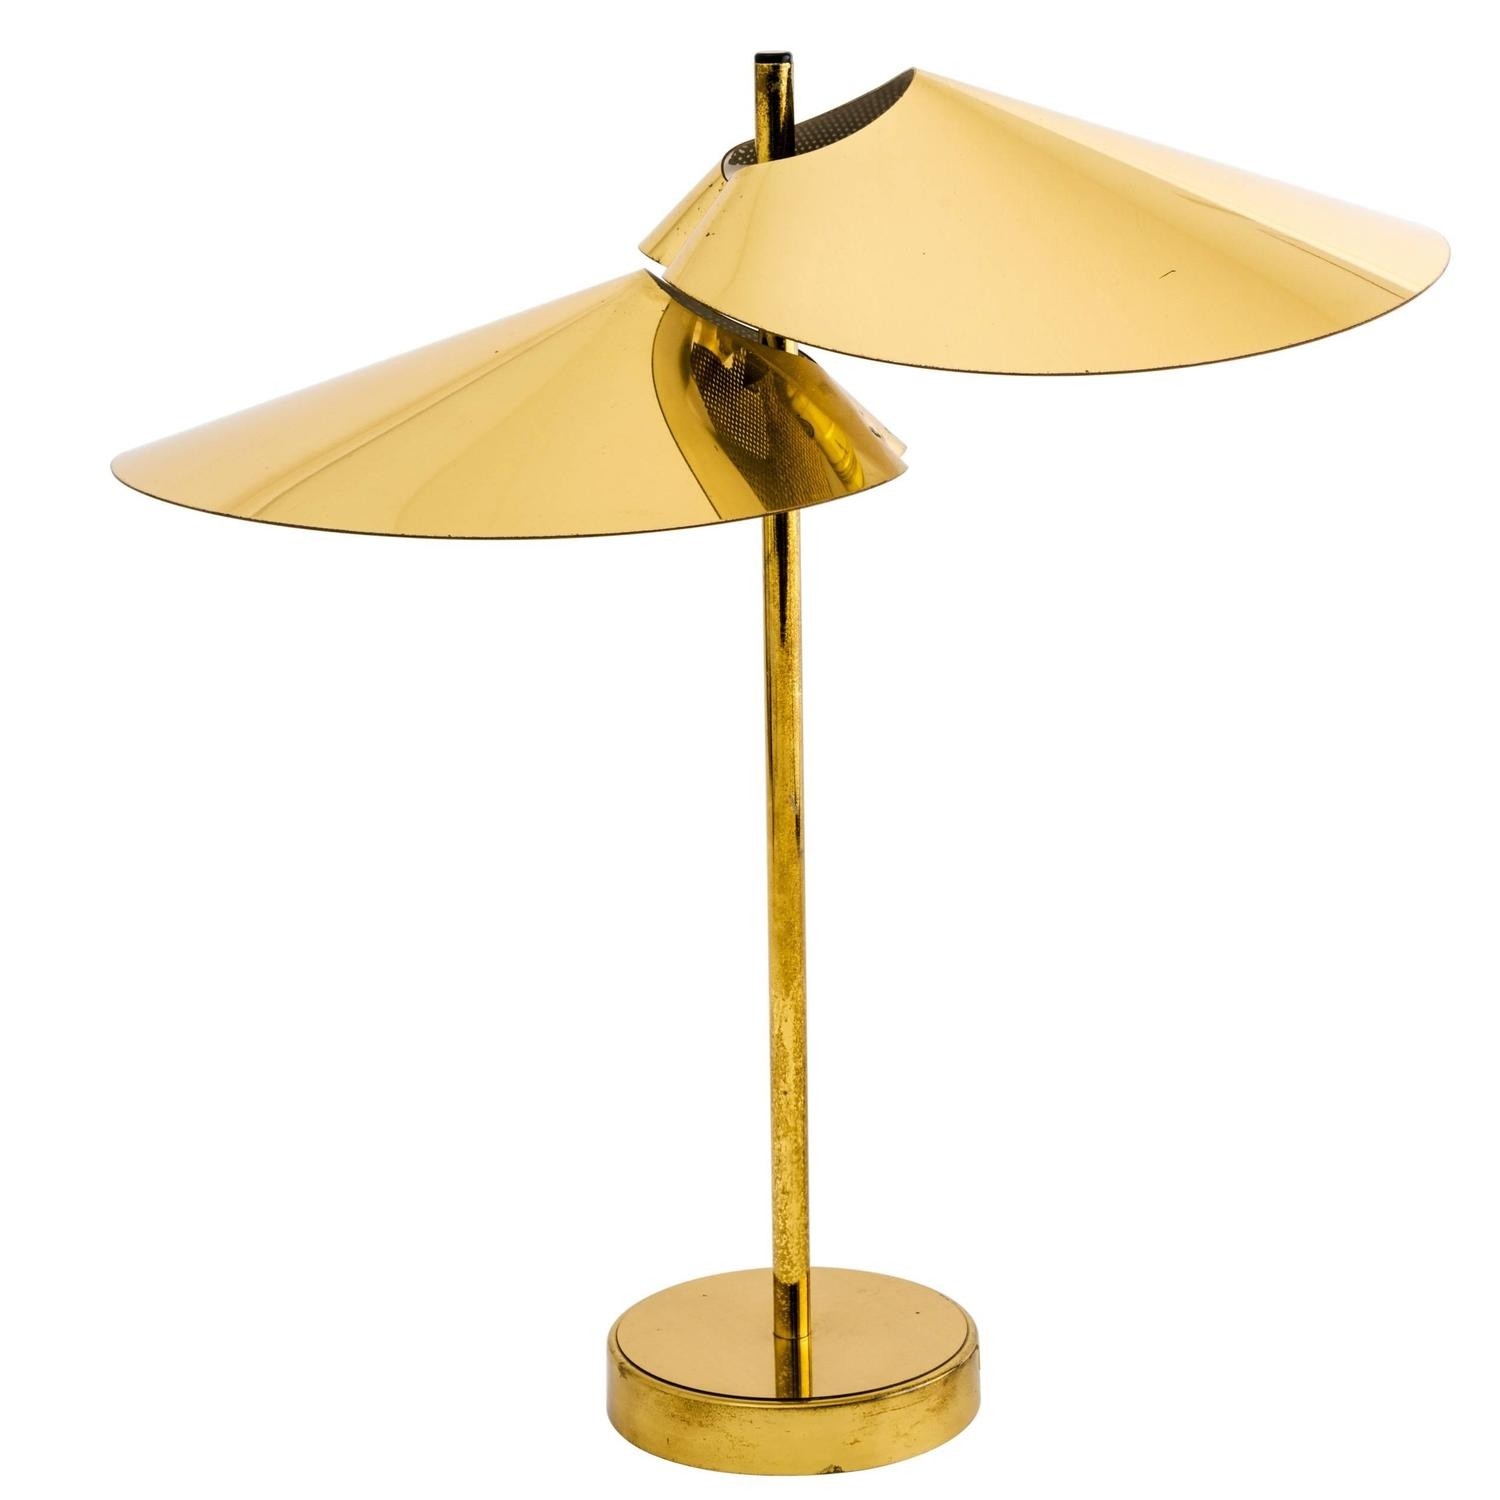 Lily pad table or desk lamp in brass by curtis